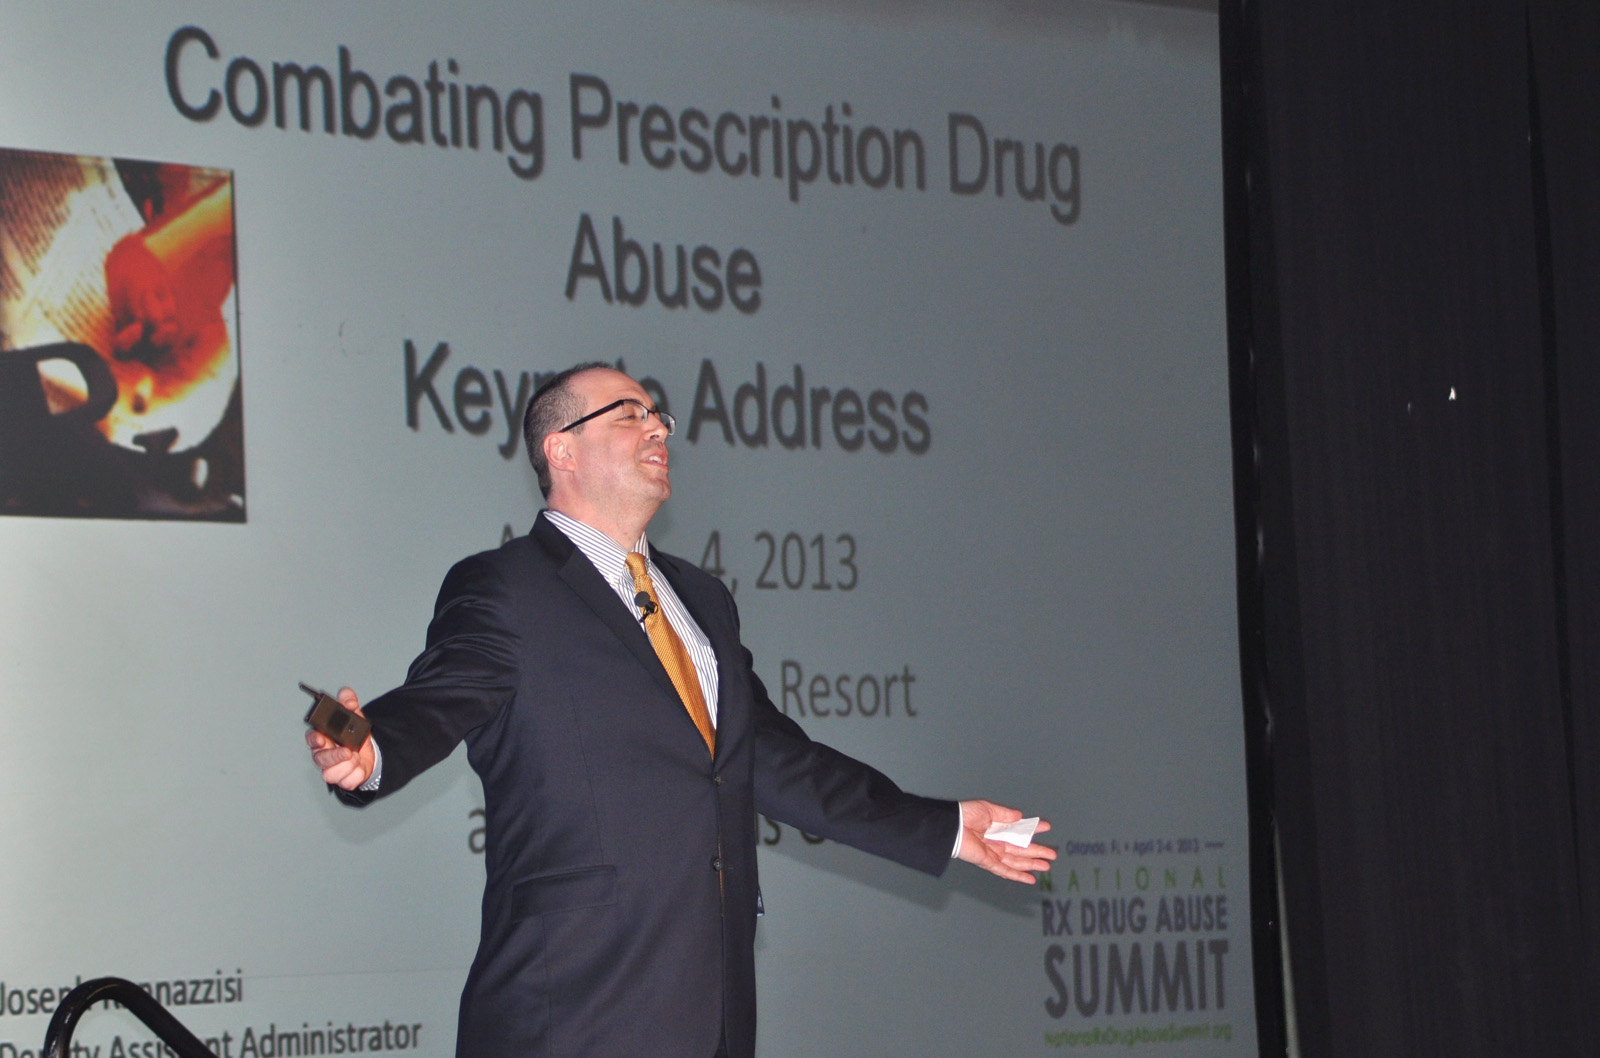 Summit focused national attention on Rx drug abuse